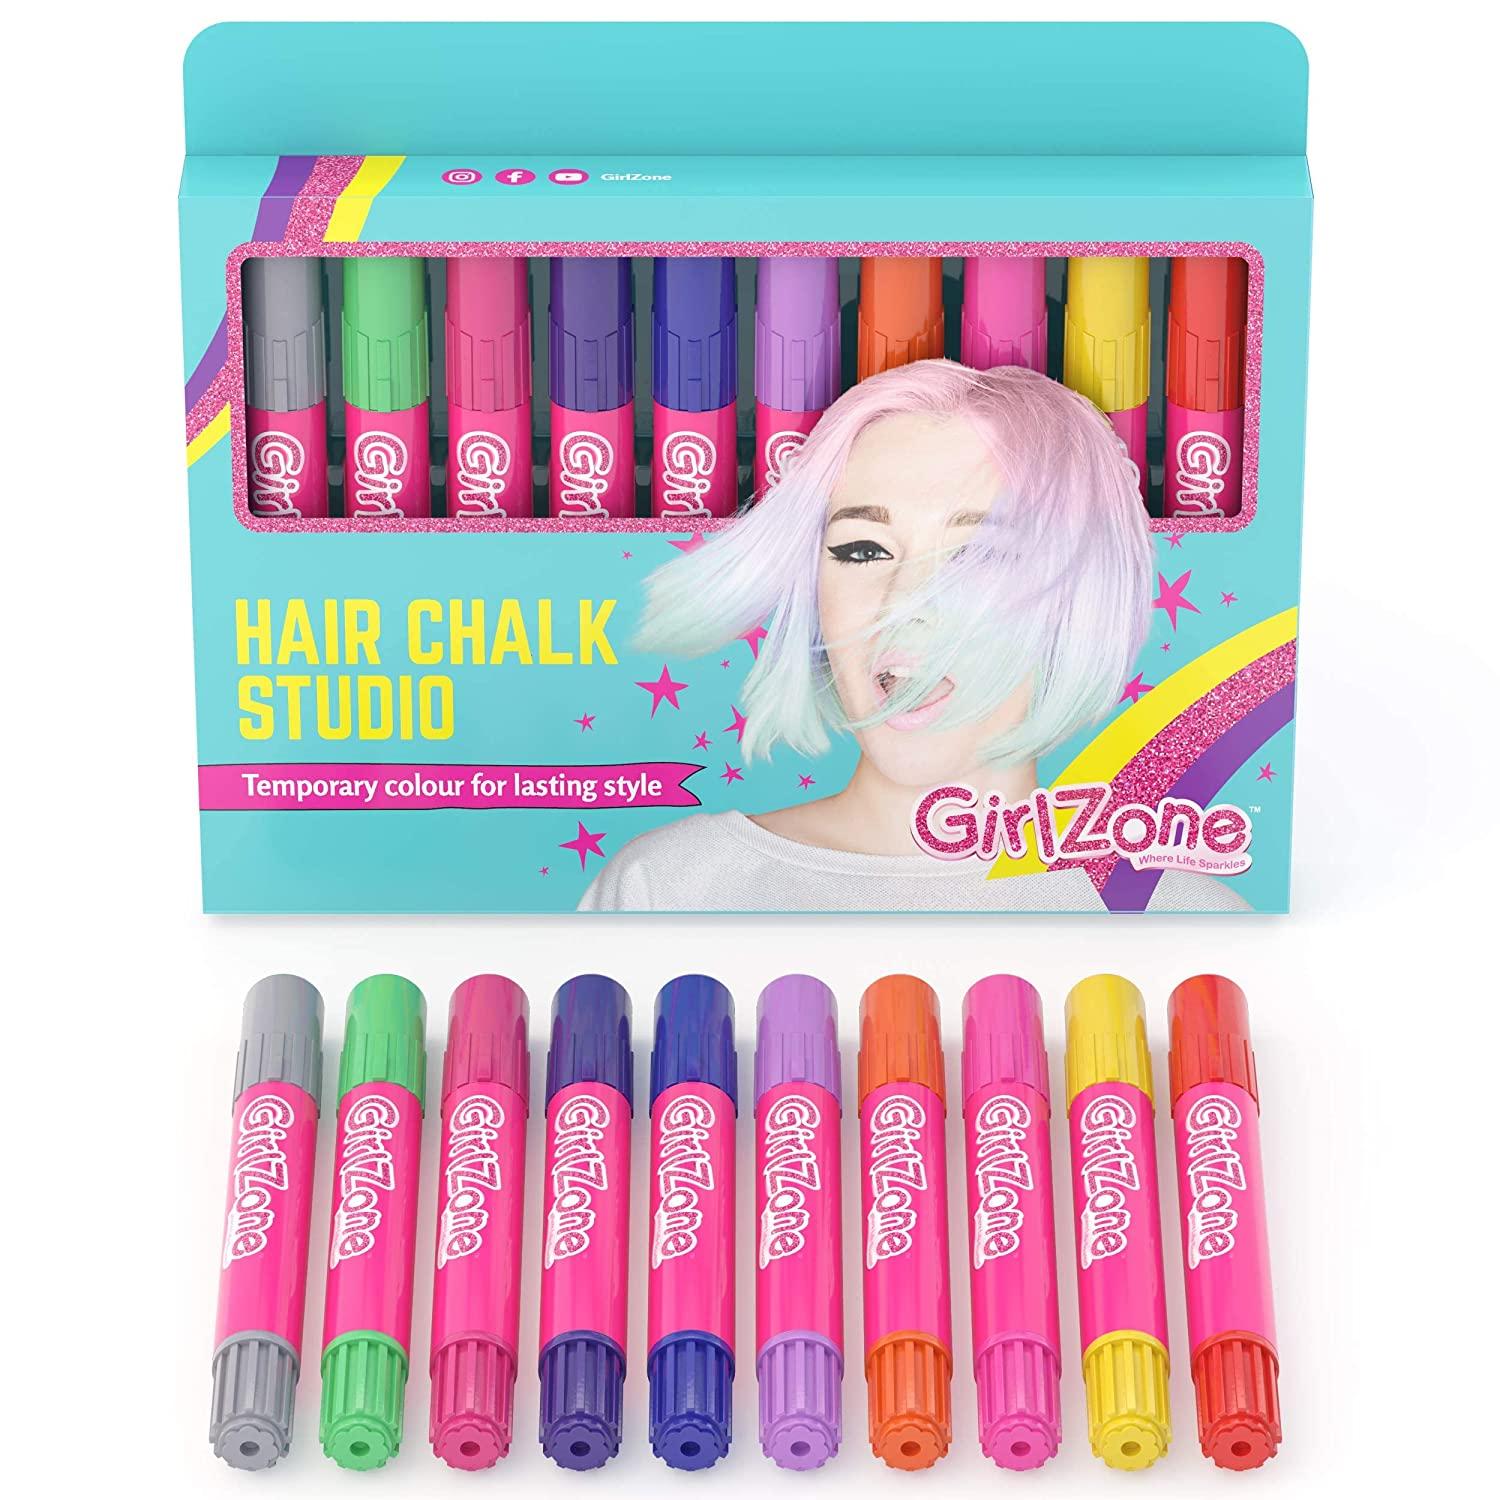 GirlZone Hair Chalk Set For Girls - 10 Piece Temporary Hair Chalks Color - Girl  Toys For Girls Ages 8-12 - Birthday Gifts For Girls - Gifts For 7 8 9 10 11  Year Old Girls - Girls Toys 8-10 Years Old